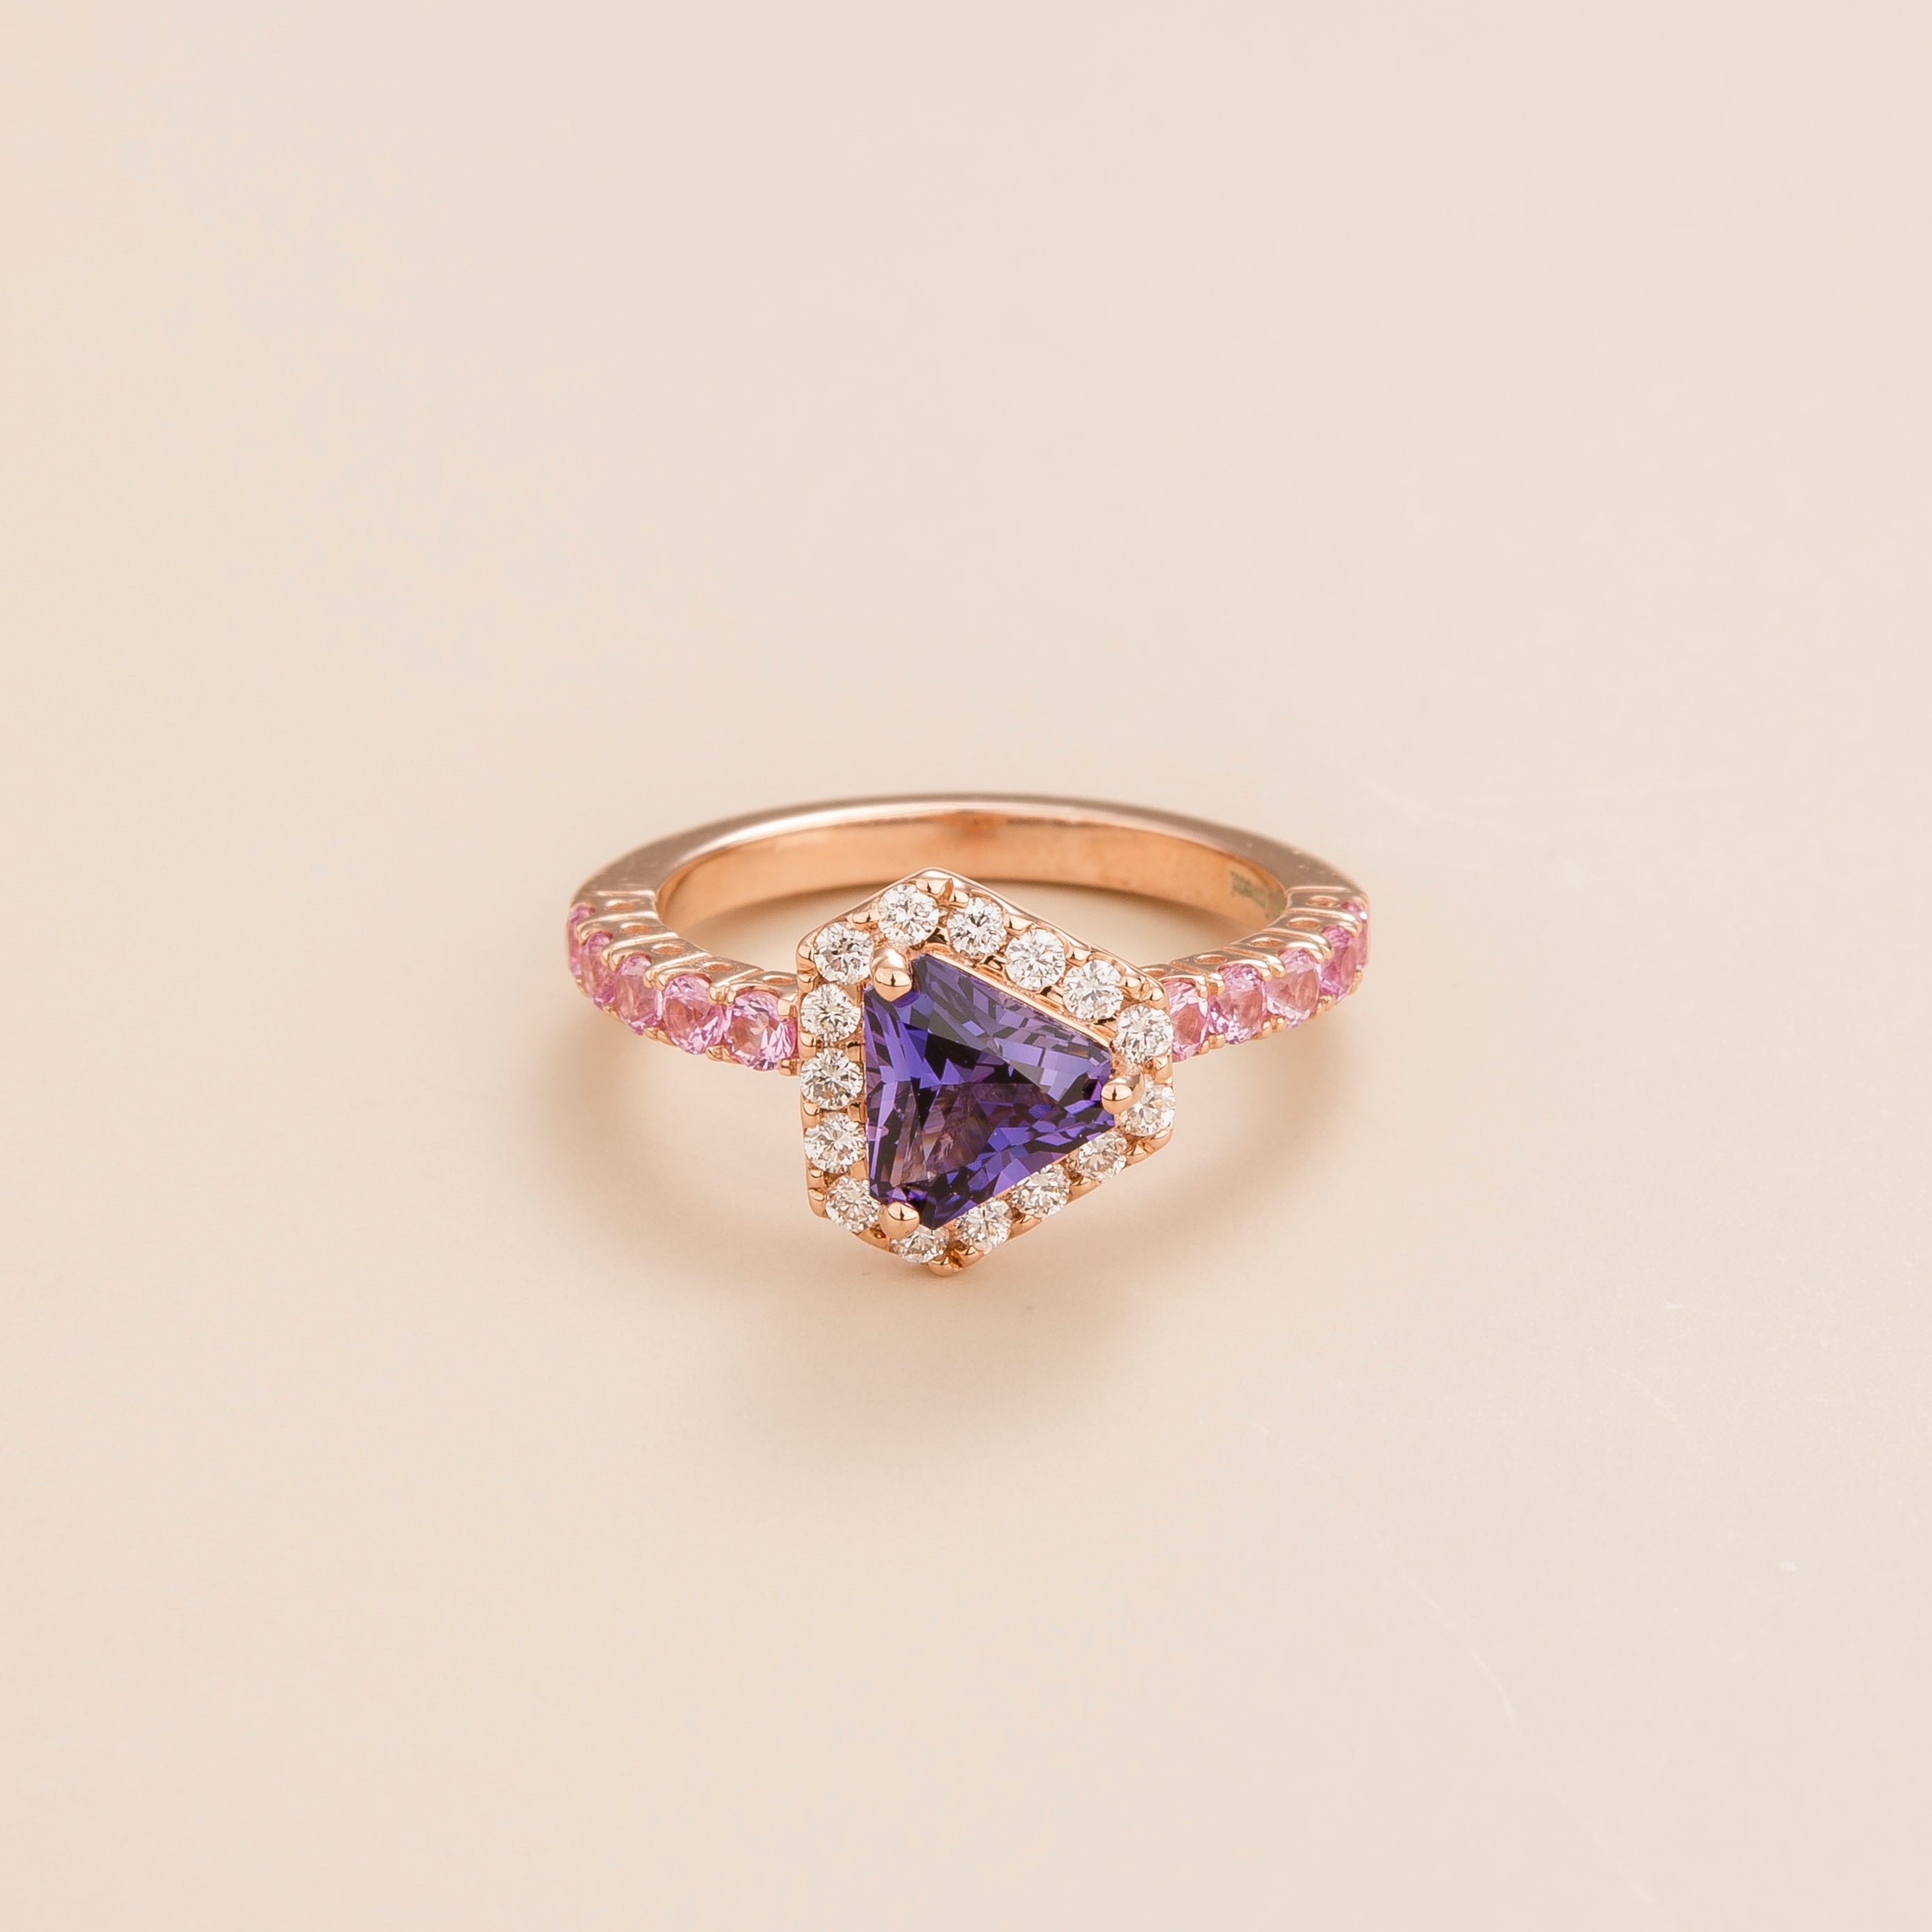 Diana ring in 18K pink gold vermeil set with lab grown diamond, purple sapphire and pink sapphire gem stones. Perfect for yourself and as gift.